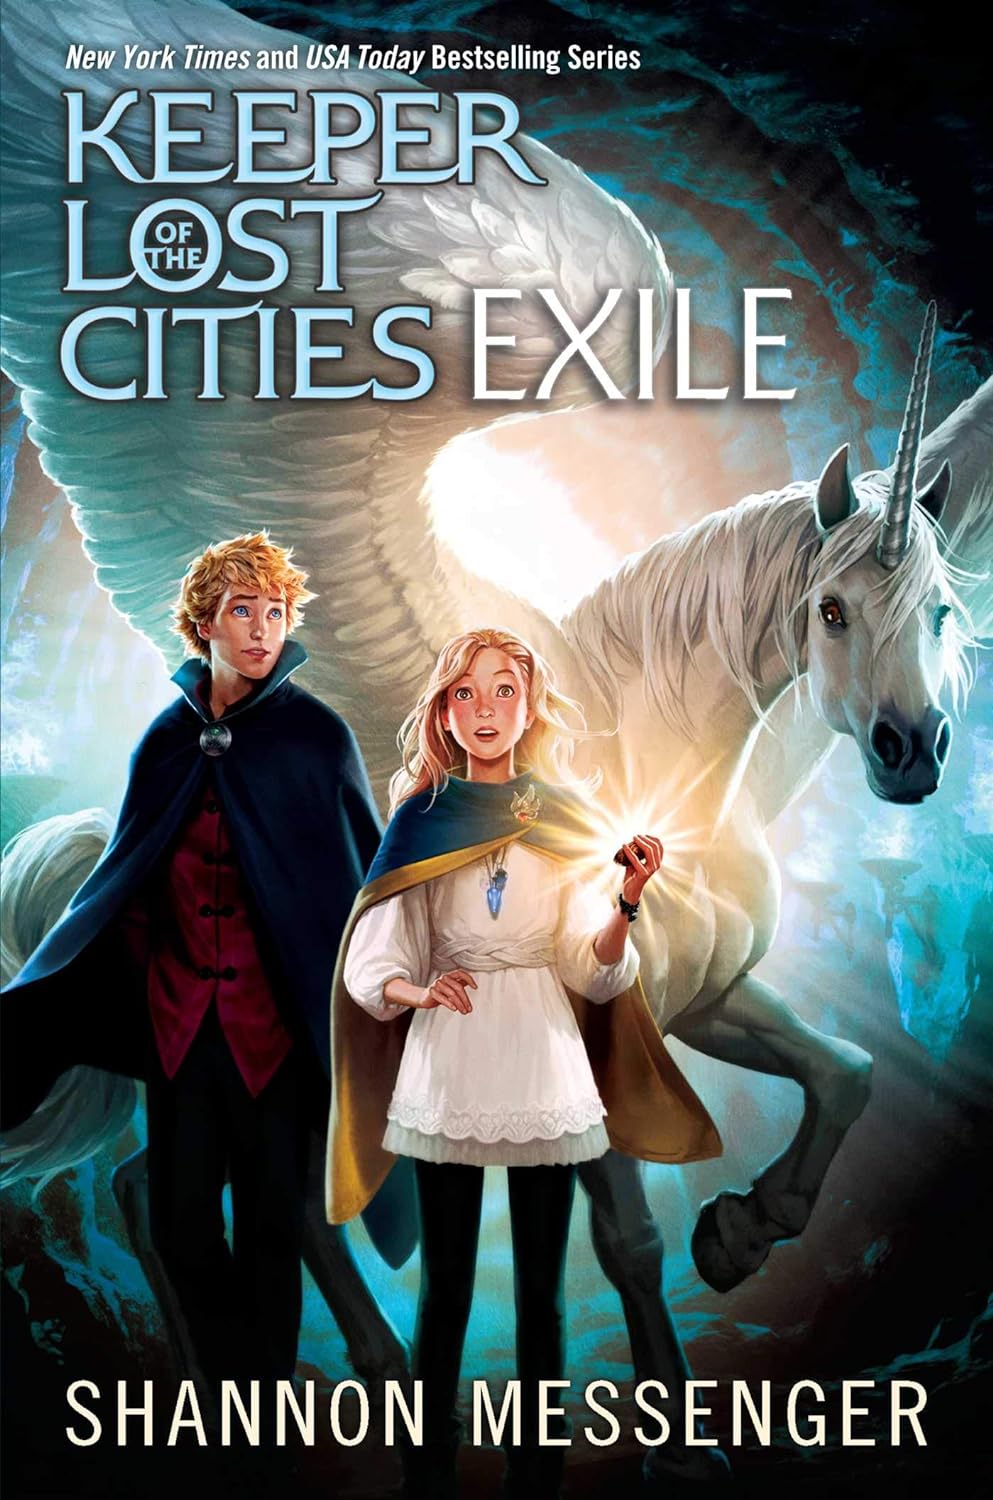 Exile (Keeper of the Lost Cities #2) - by Shannon Messenger